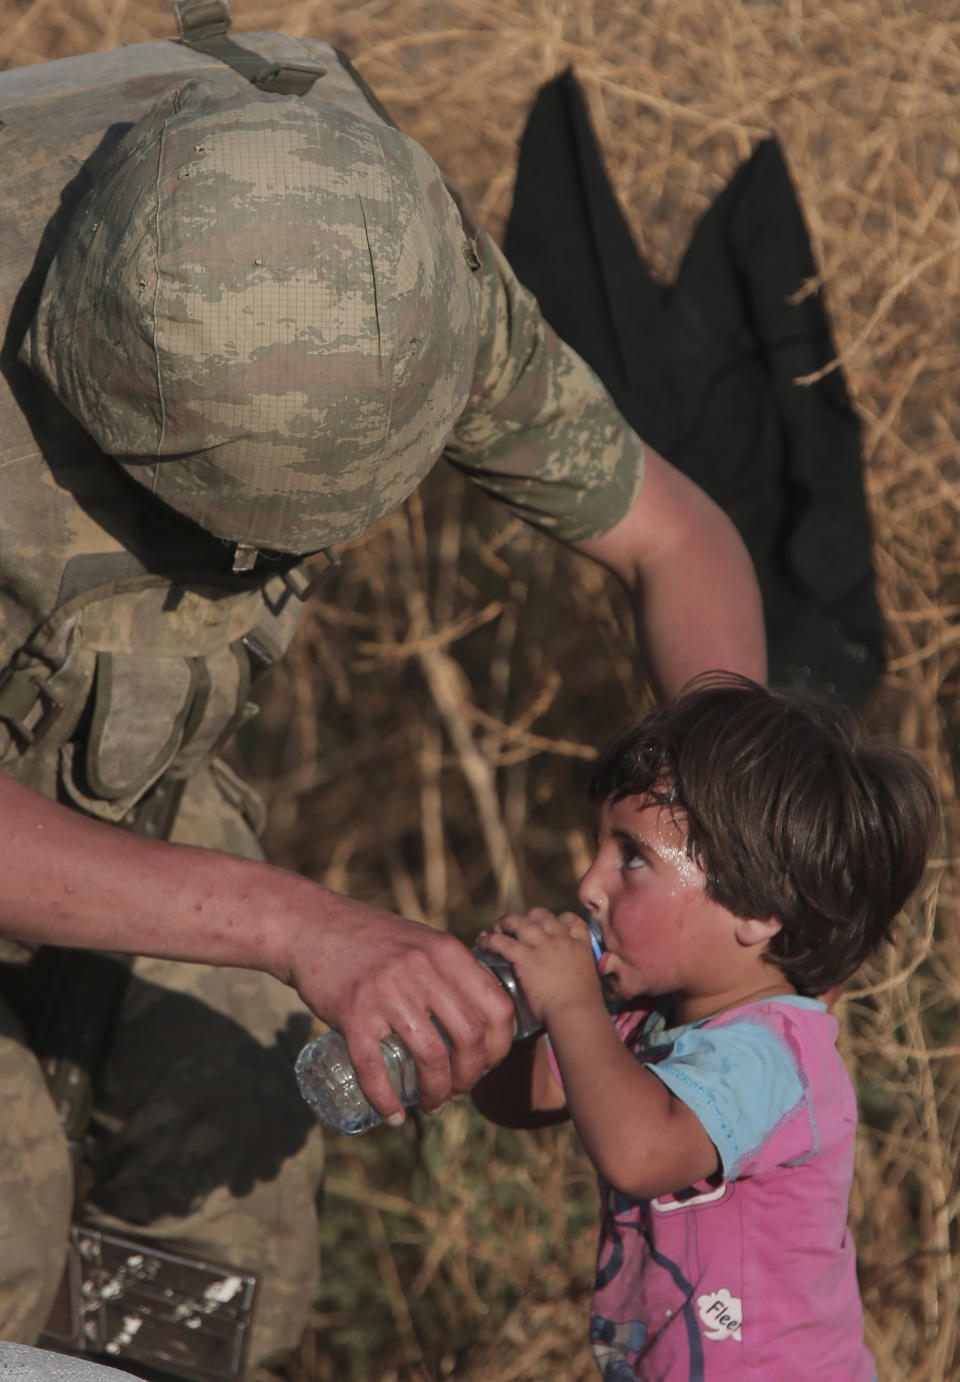 File - In this June 14, 2015, file photo a Turkish soldier offers water to a Syrian refugee child after crossing into Turkey from Syria, in Akcakale, Sanliurfa province, southeastern Turkey. As Turkish forces invaded northern Syria in early October 2019, supporters of the offensive launched an online misinformation campaign. Dozens of misleading images claiming to show Turkey’s soldiers cuddling babies, feeding hungry toddlers and carrying elderly women spread across Twitter and Instagram where they were liked, retweeted and viewed thousands of times. They included this photo, which was, in fact, shot by an Associated Press photographer in 2015. (AP Photo/Lefteris Pitarakis, File)